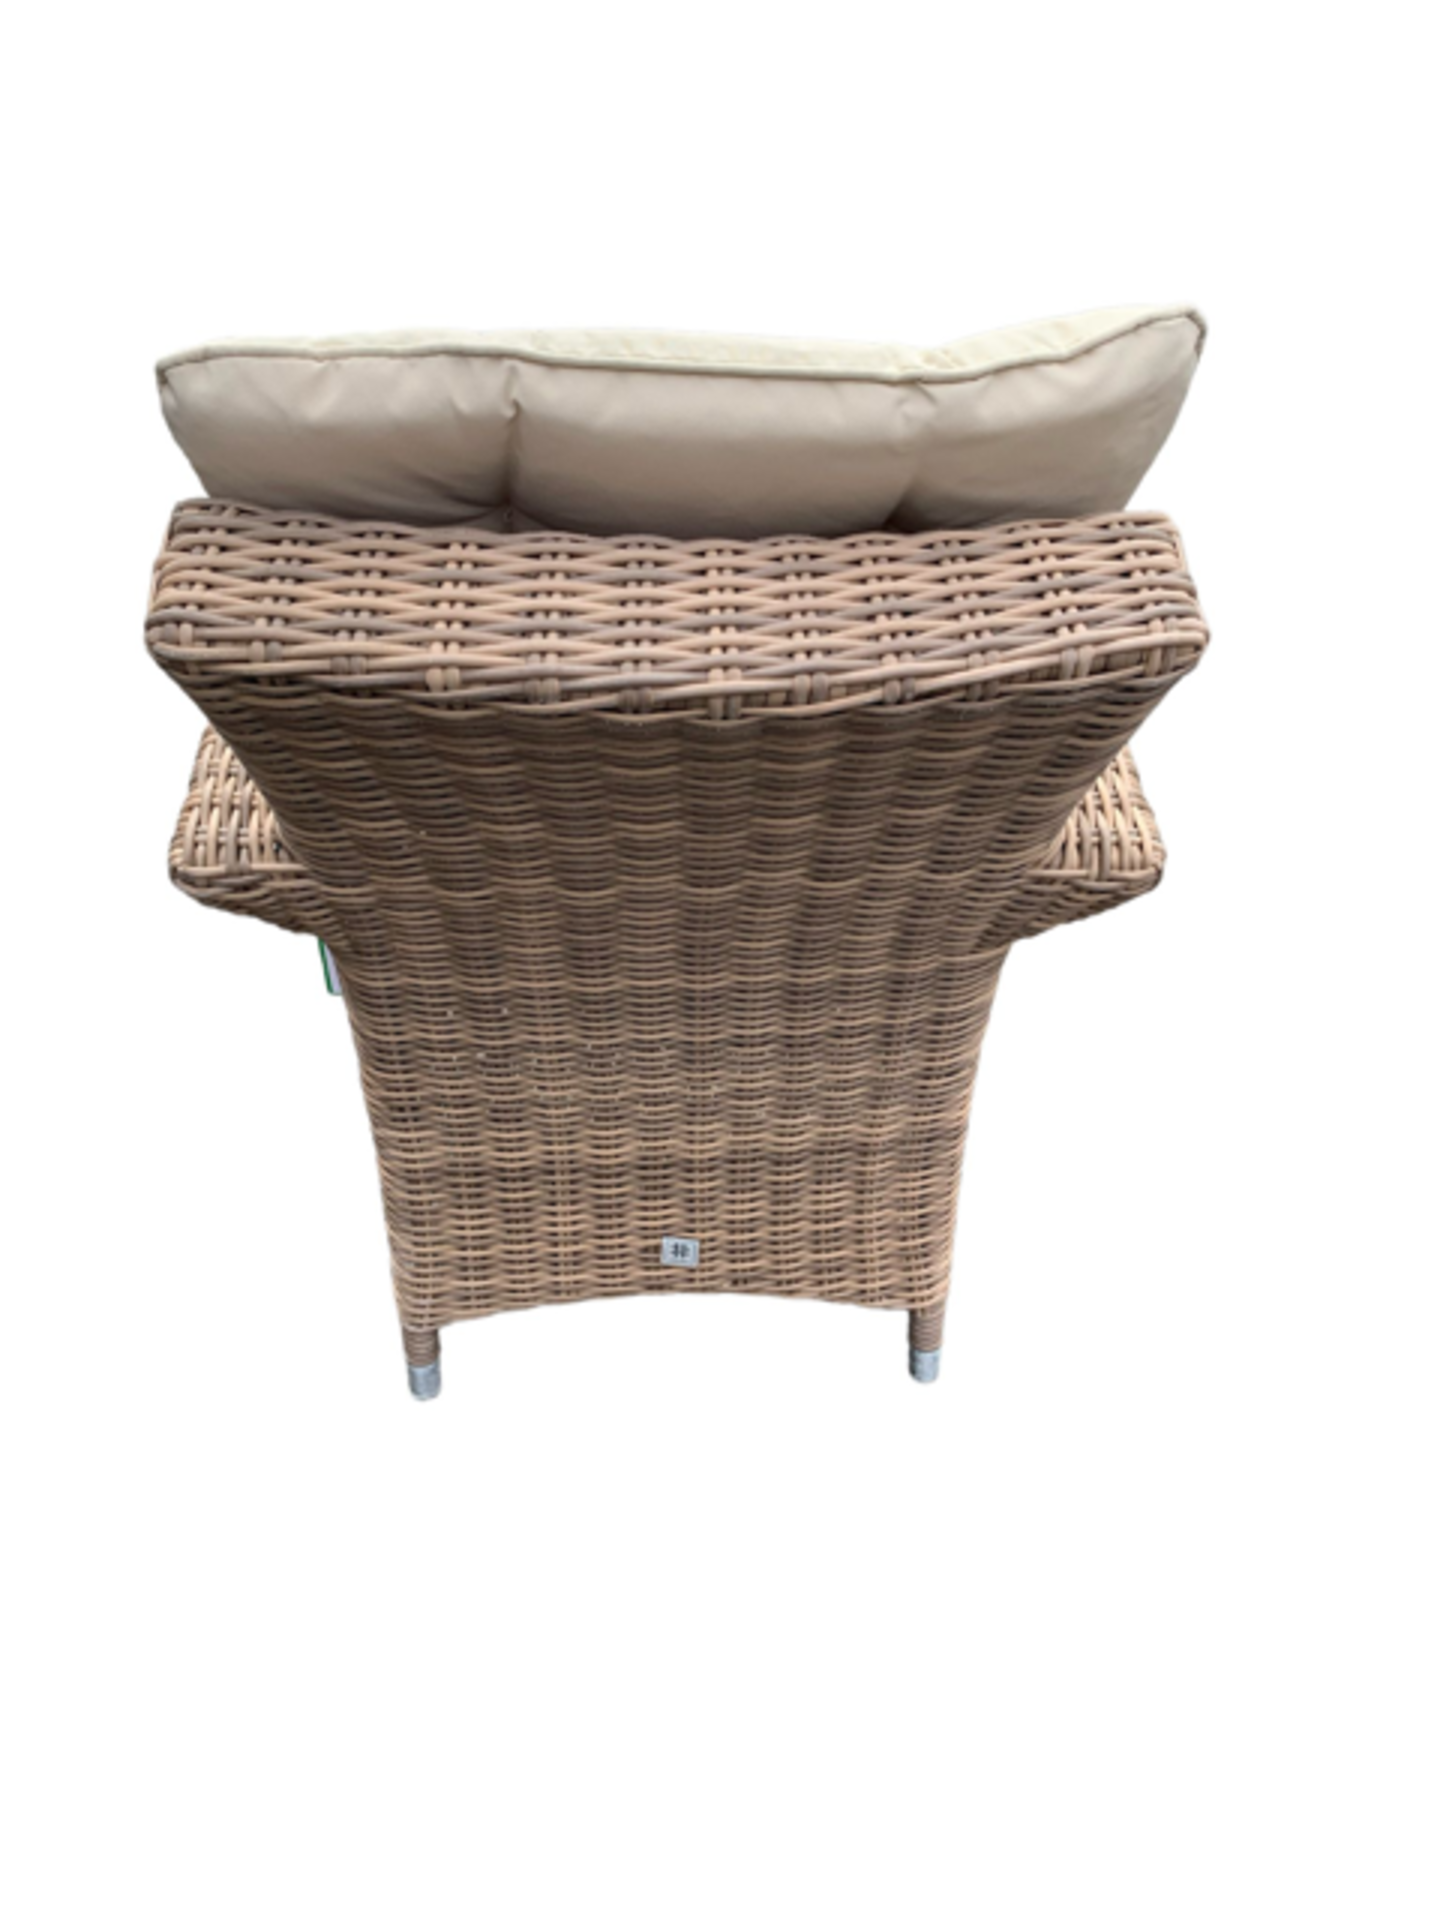 BRAND NEW 4 SEATER ROUND RATTAN DINING TABLE SET WITH ICE BUCKET AND WEATHER PROOF RAIN COVER. - Image 6 of 6